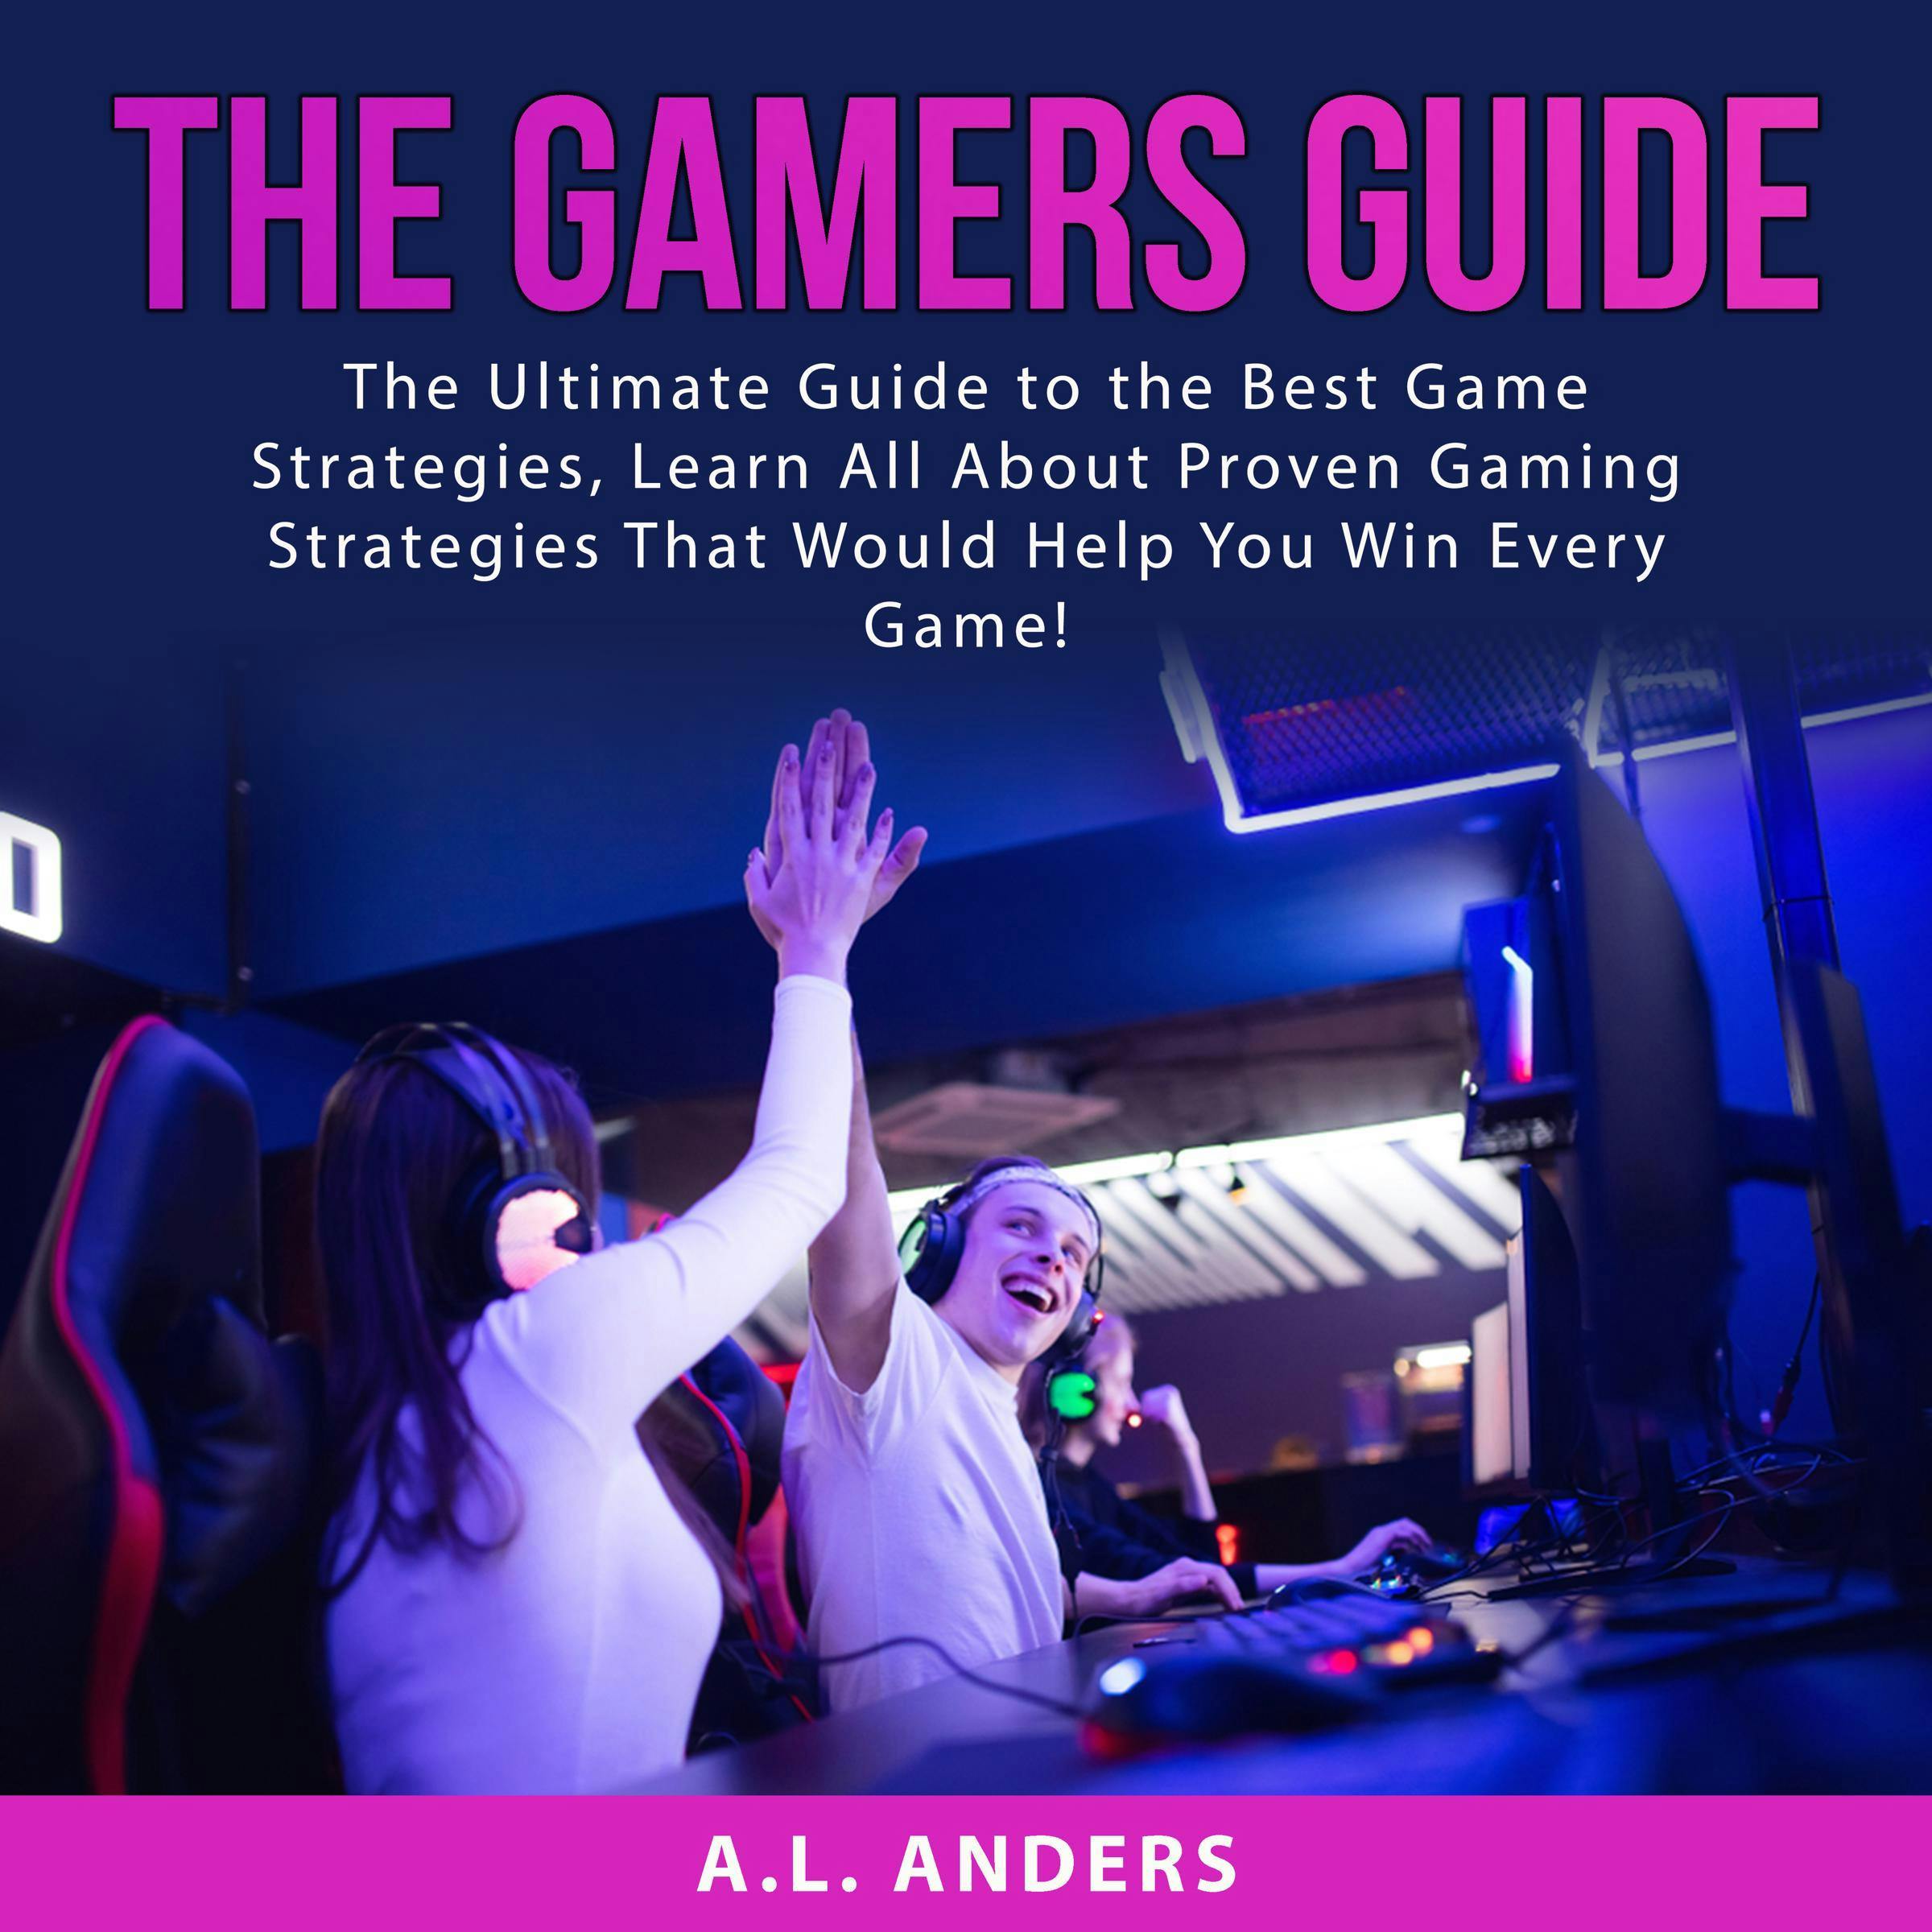 The Gamers Guide: The Ultimate Guide to the Best Game Strategies, Learn All About Proven Gaming Strategies That Would Help You Win Every Game! - A.L. Anders